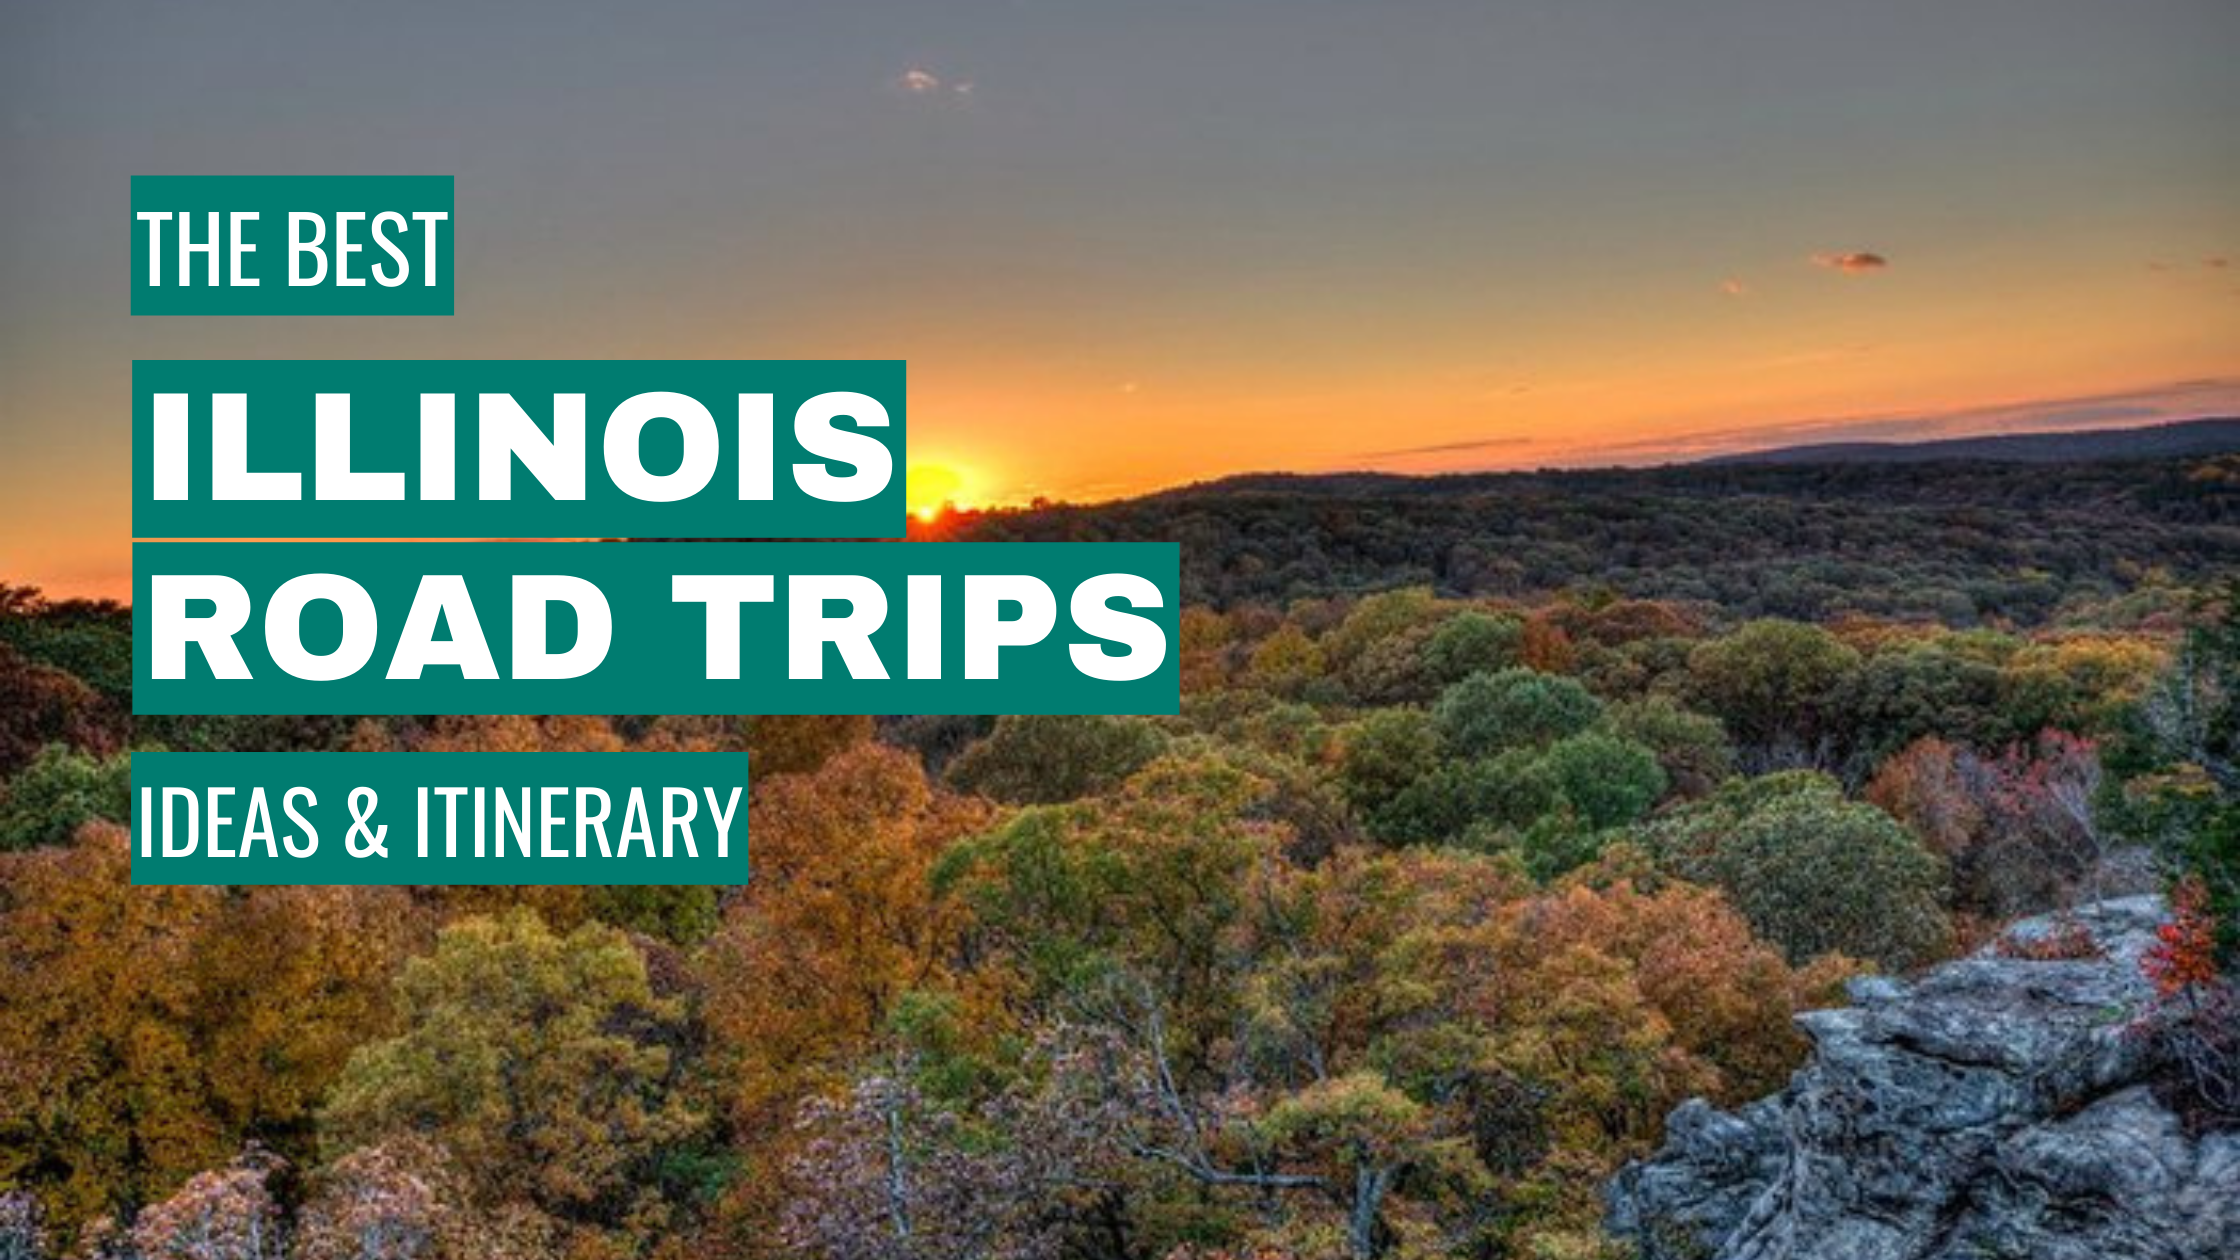 Illinois Road Trip Ideas: 11 Best Road Trips + Itinerary